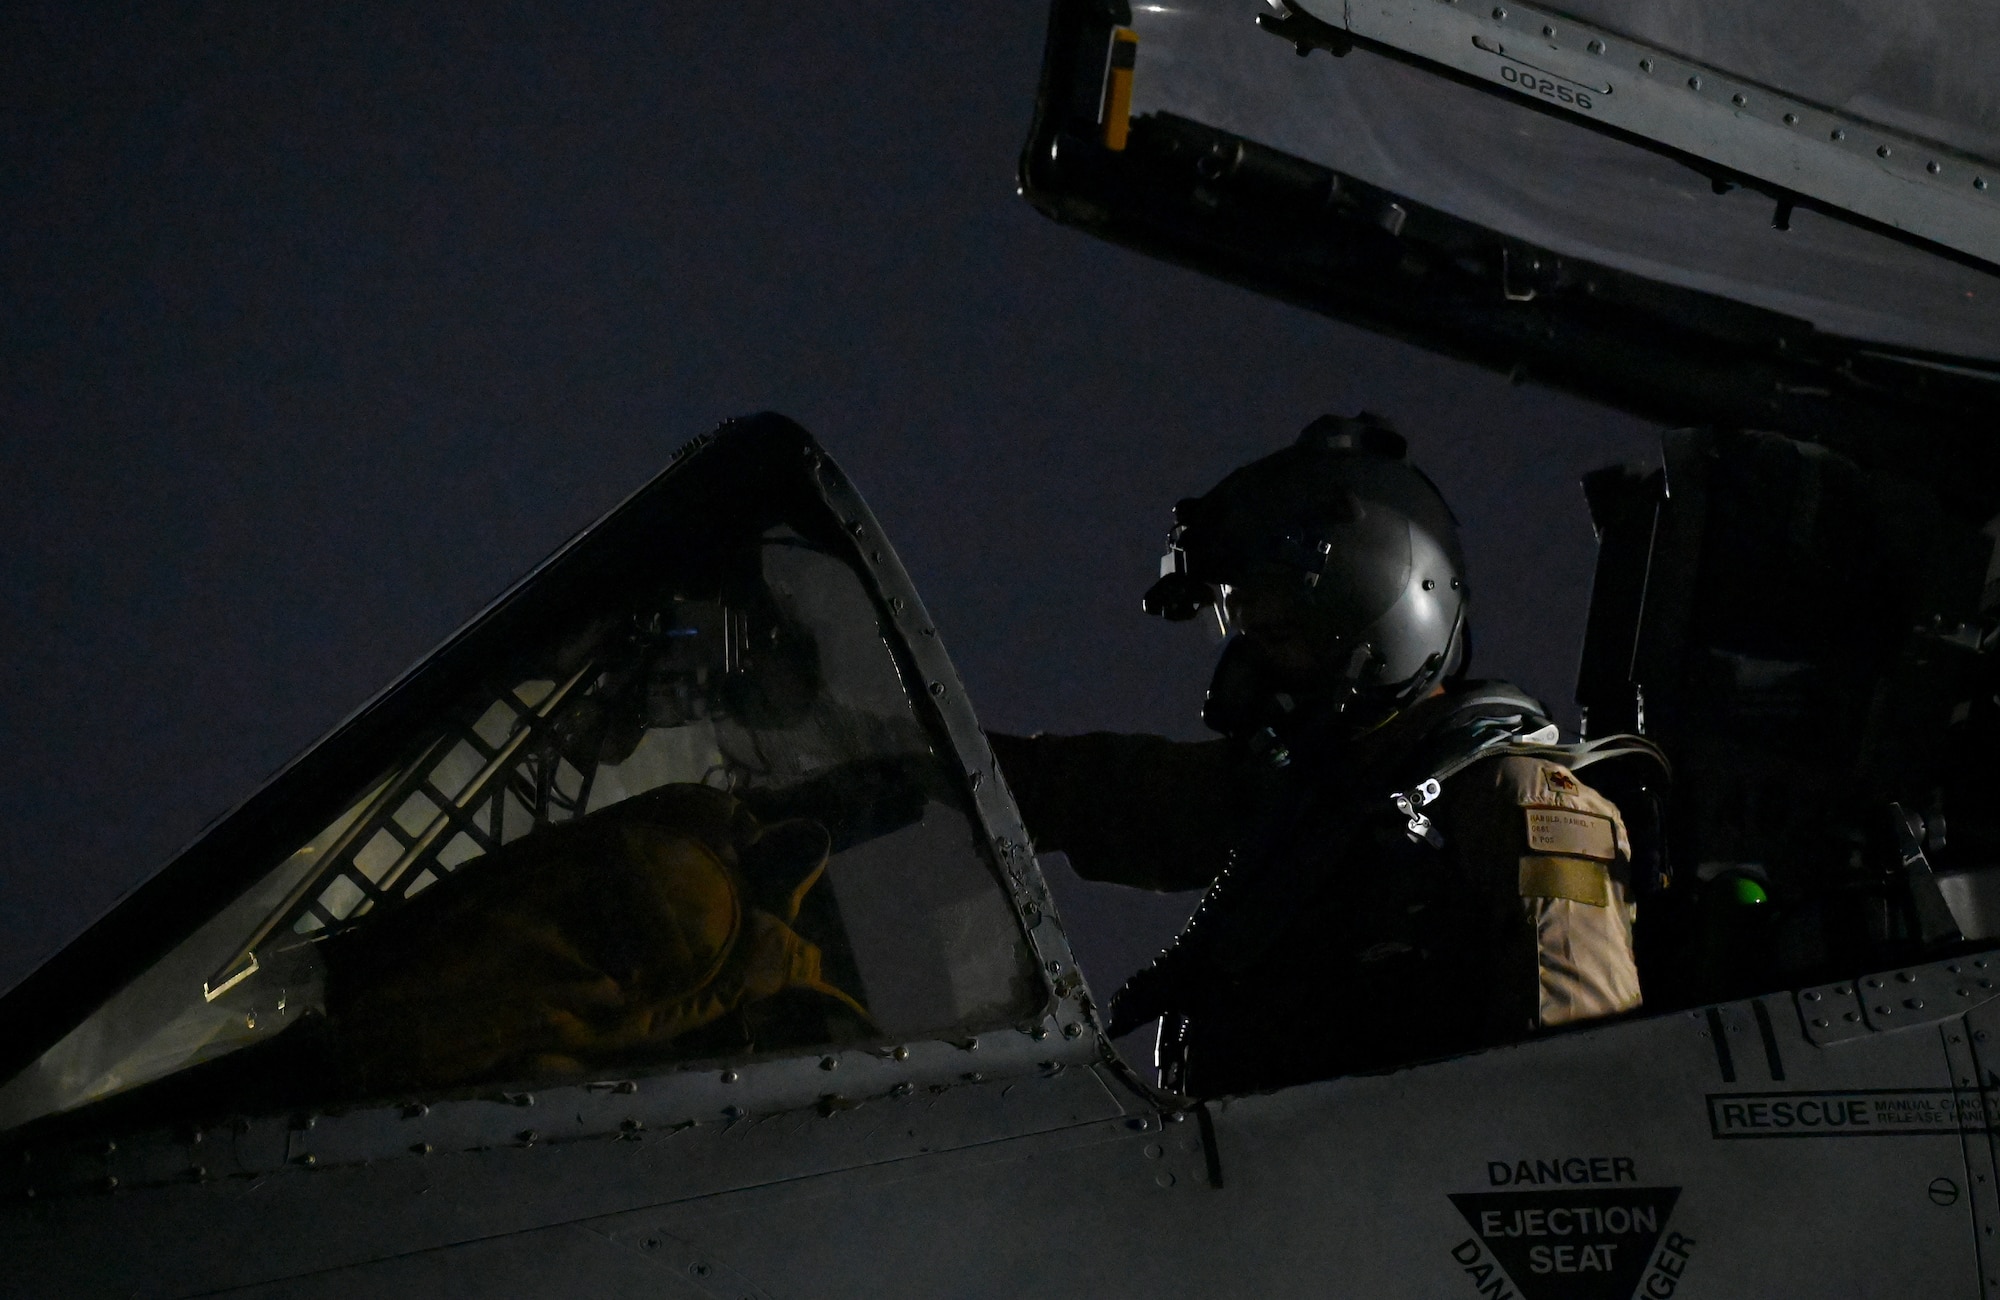 U.S. Air Force Maj. Daniel Harold, 75th Expeditionary Fighter Squadron pilot, prepares to taxi an A-10 Thunderbolt II prior to a combat sortie in the U.S. Central Command area of responsibility at Al Dhafra Air Base, United Arab Emirates, April 20, 2022. The deployment of A-10s in the region provides additional capability in the Middle East alongside fighter aircraft. This deployment ensures close air support specialists are able to build upon their skills in environments outside of the United States and ensure combat operations remain sharp across the force. (U.S. Air Force photo by Tech. Sgt. Alex Fox Echols III)